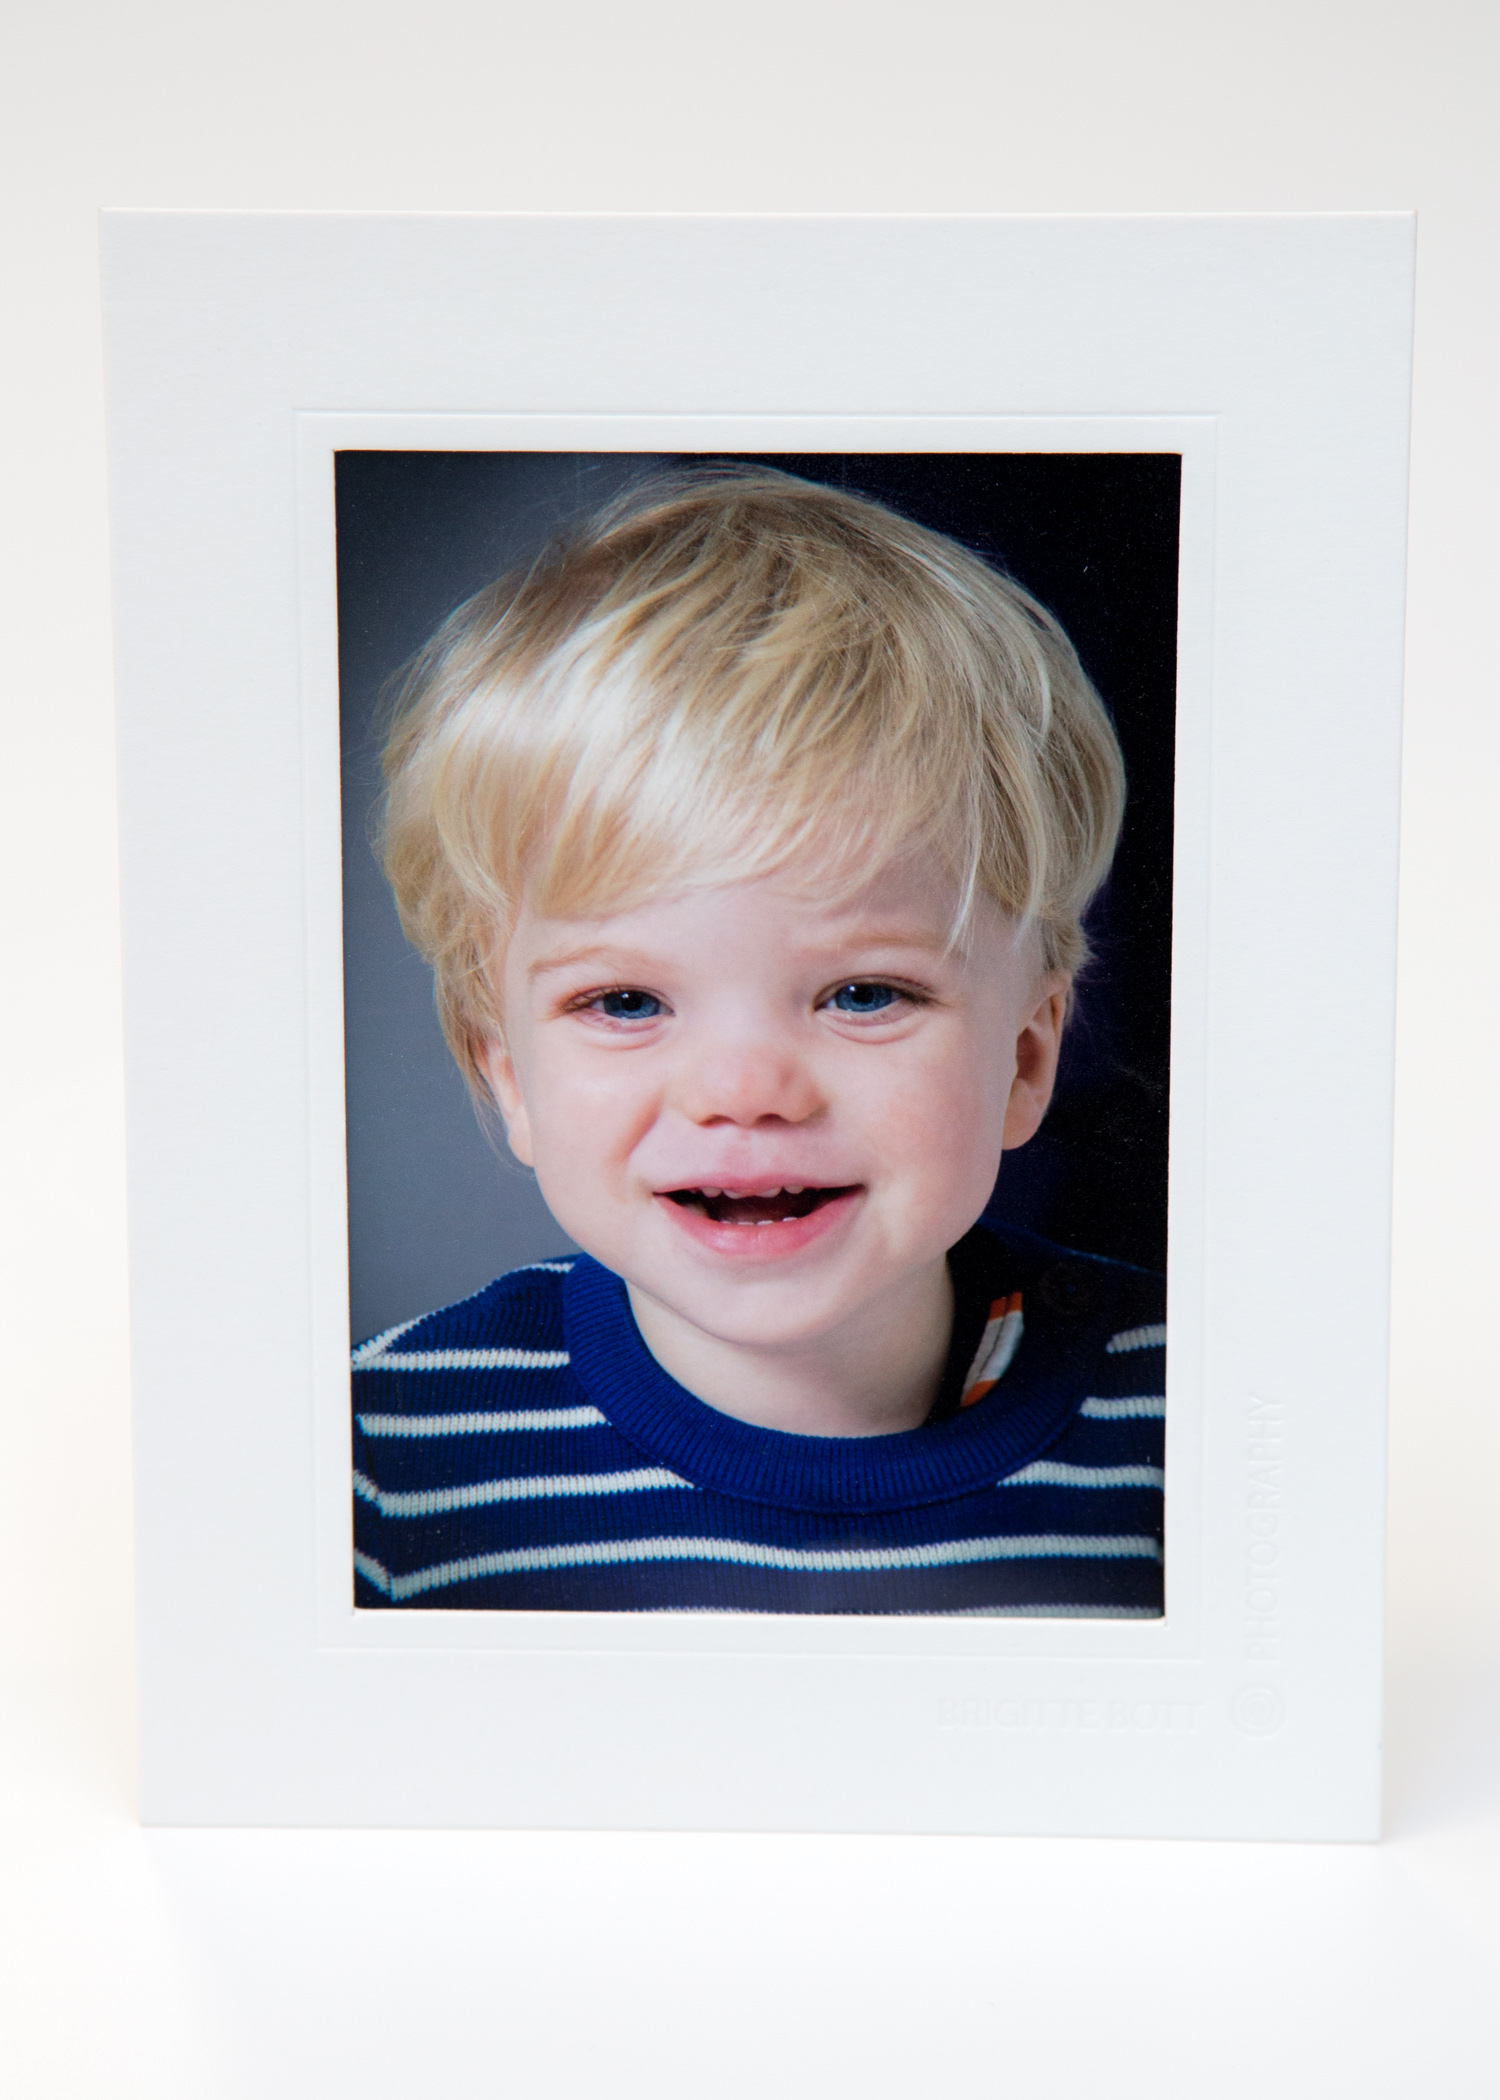 high quality archival prints with a cardboard mount from £ 14